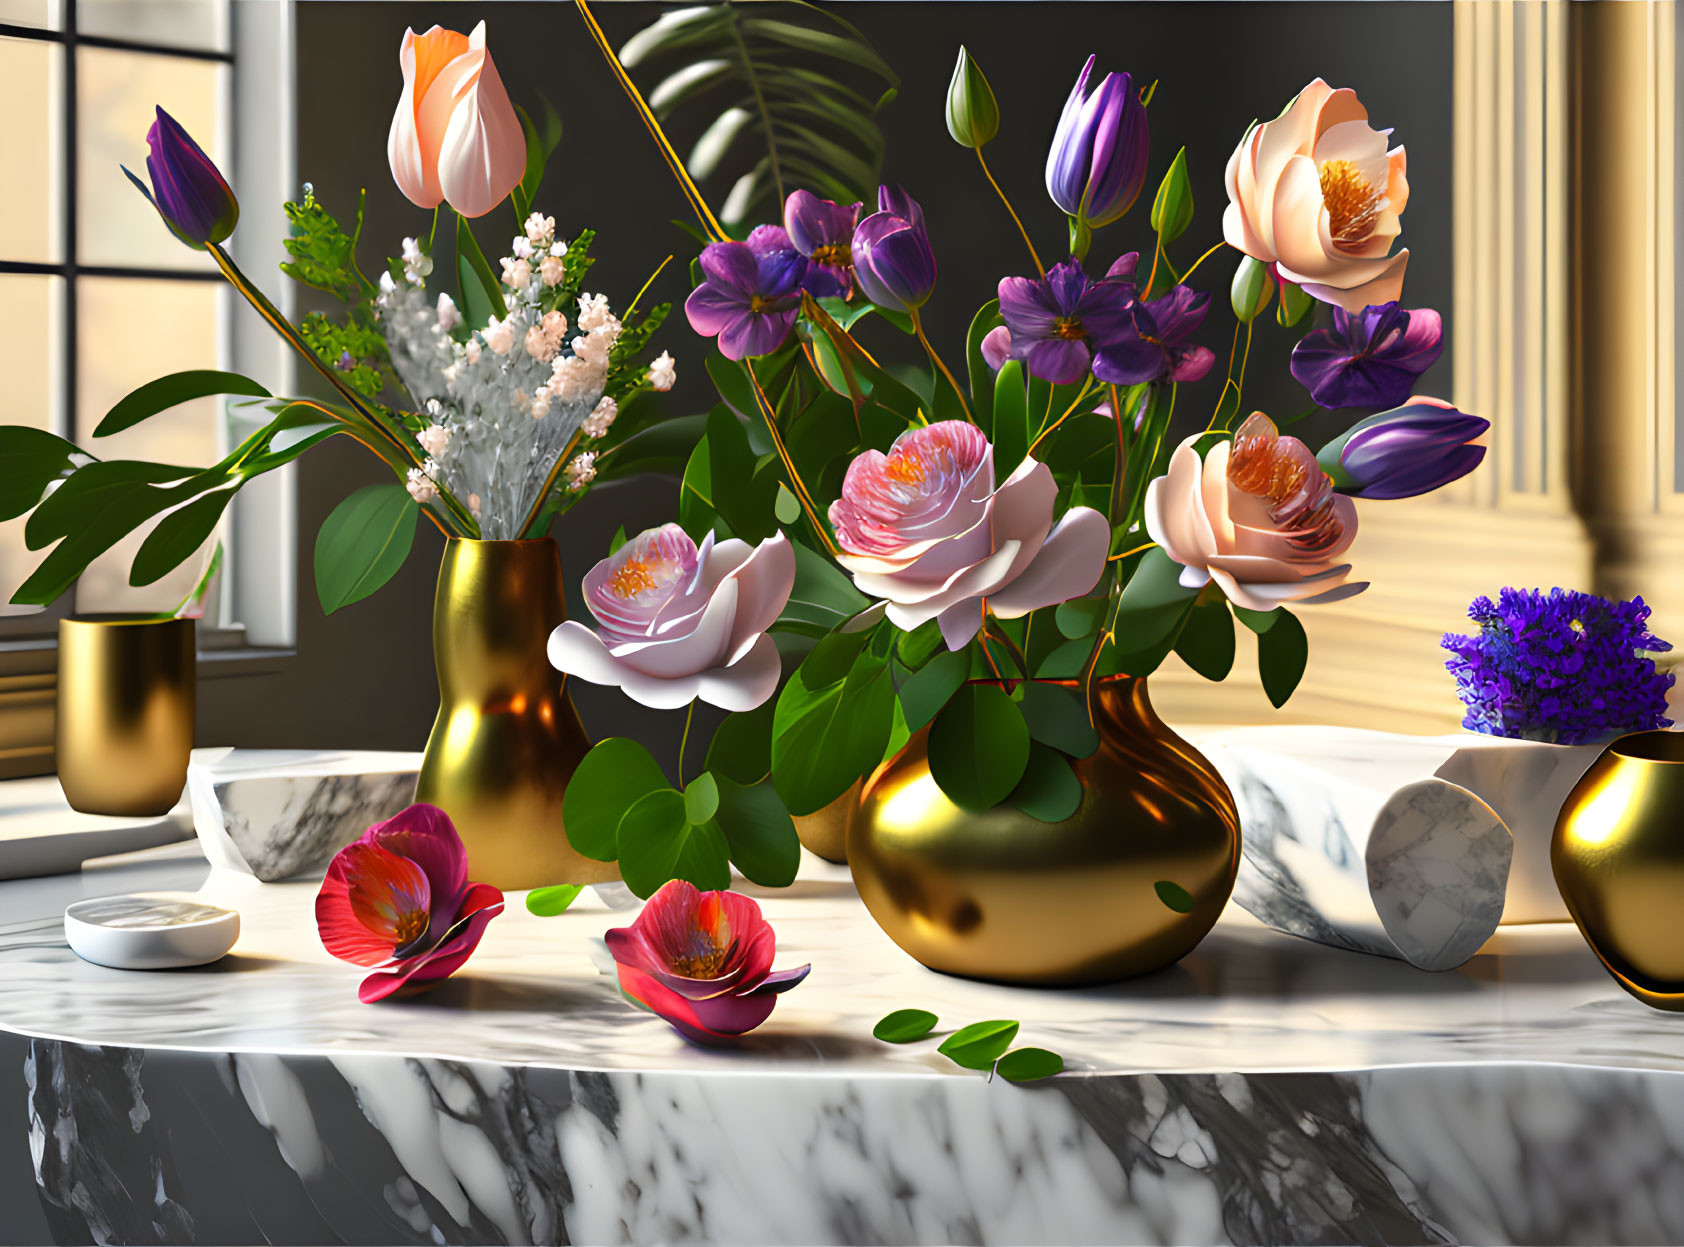 Luxurious floral arrangement on marble with golden vases and greenery